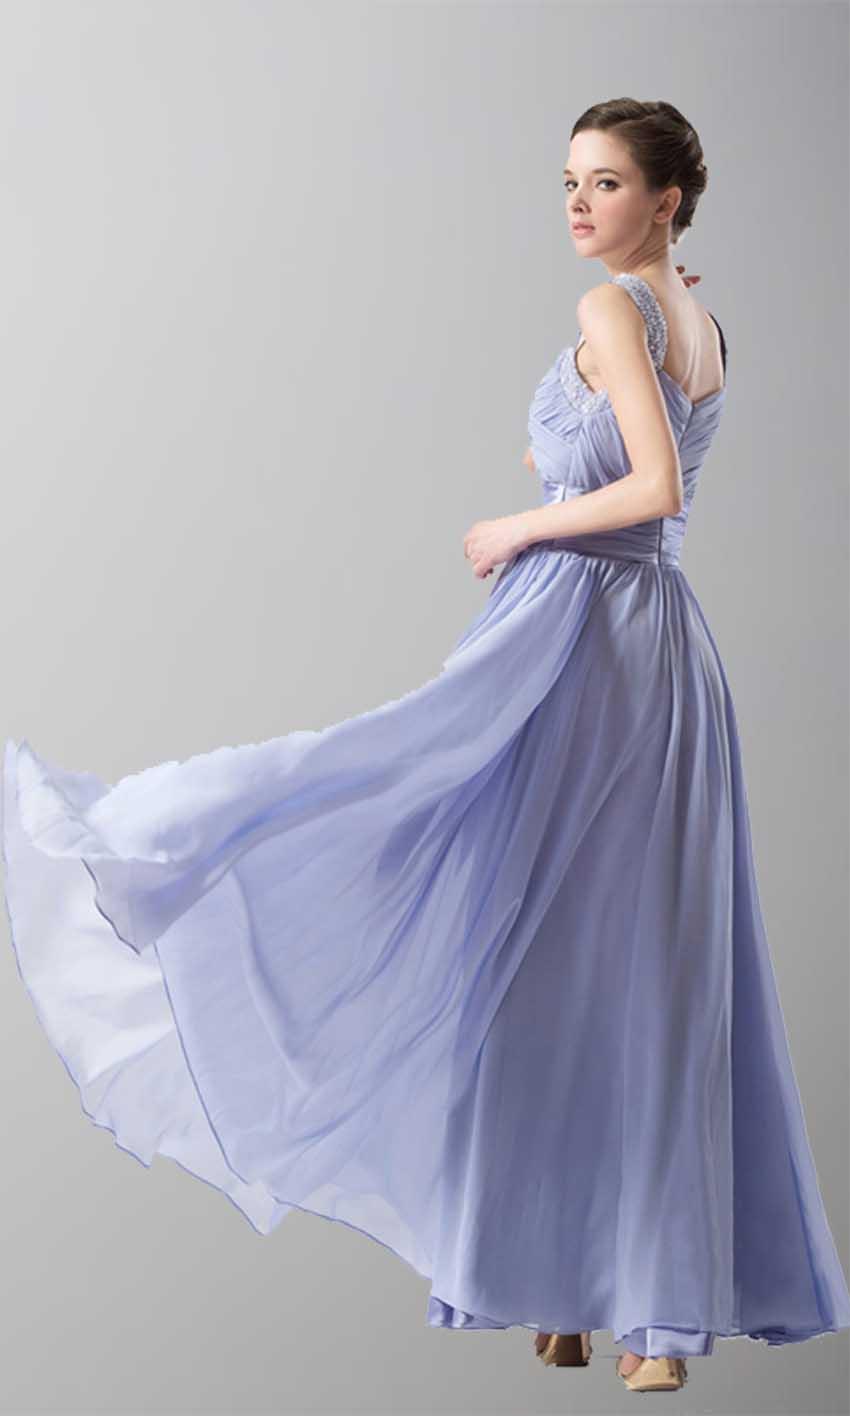 Mariage - Shoulder Belt Blue Long Chiffon Bridesmaid Dress KSP144 [KSP144] - £93.00 : Cheap Prom Dresses Uk, Bridesmaid Dresses, 2014 Prom & Evening Dresses, Look for cheap elegant prom dresses 2014, cocktail gowns, or dresses for special occasions? kissprom.co.uk 